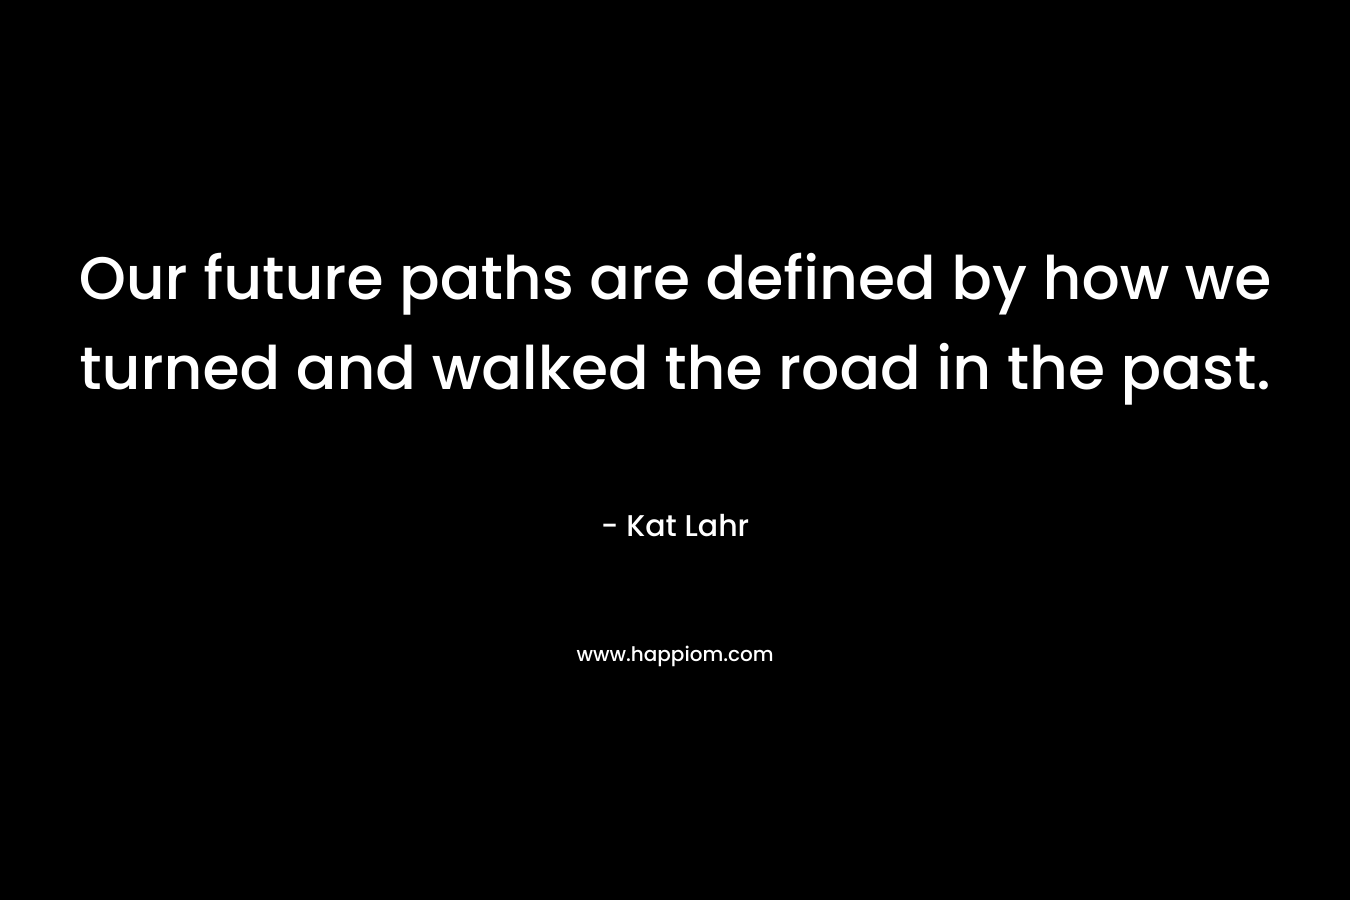 Our future paths are defined by how we turned and walked the road in the past.